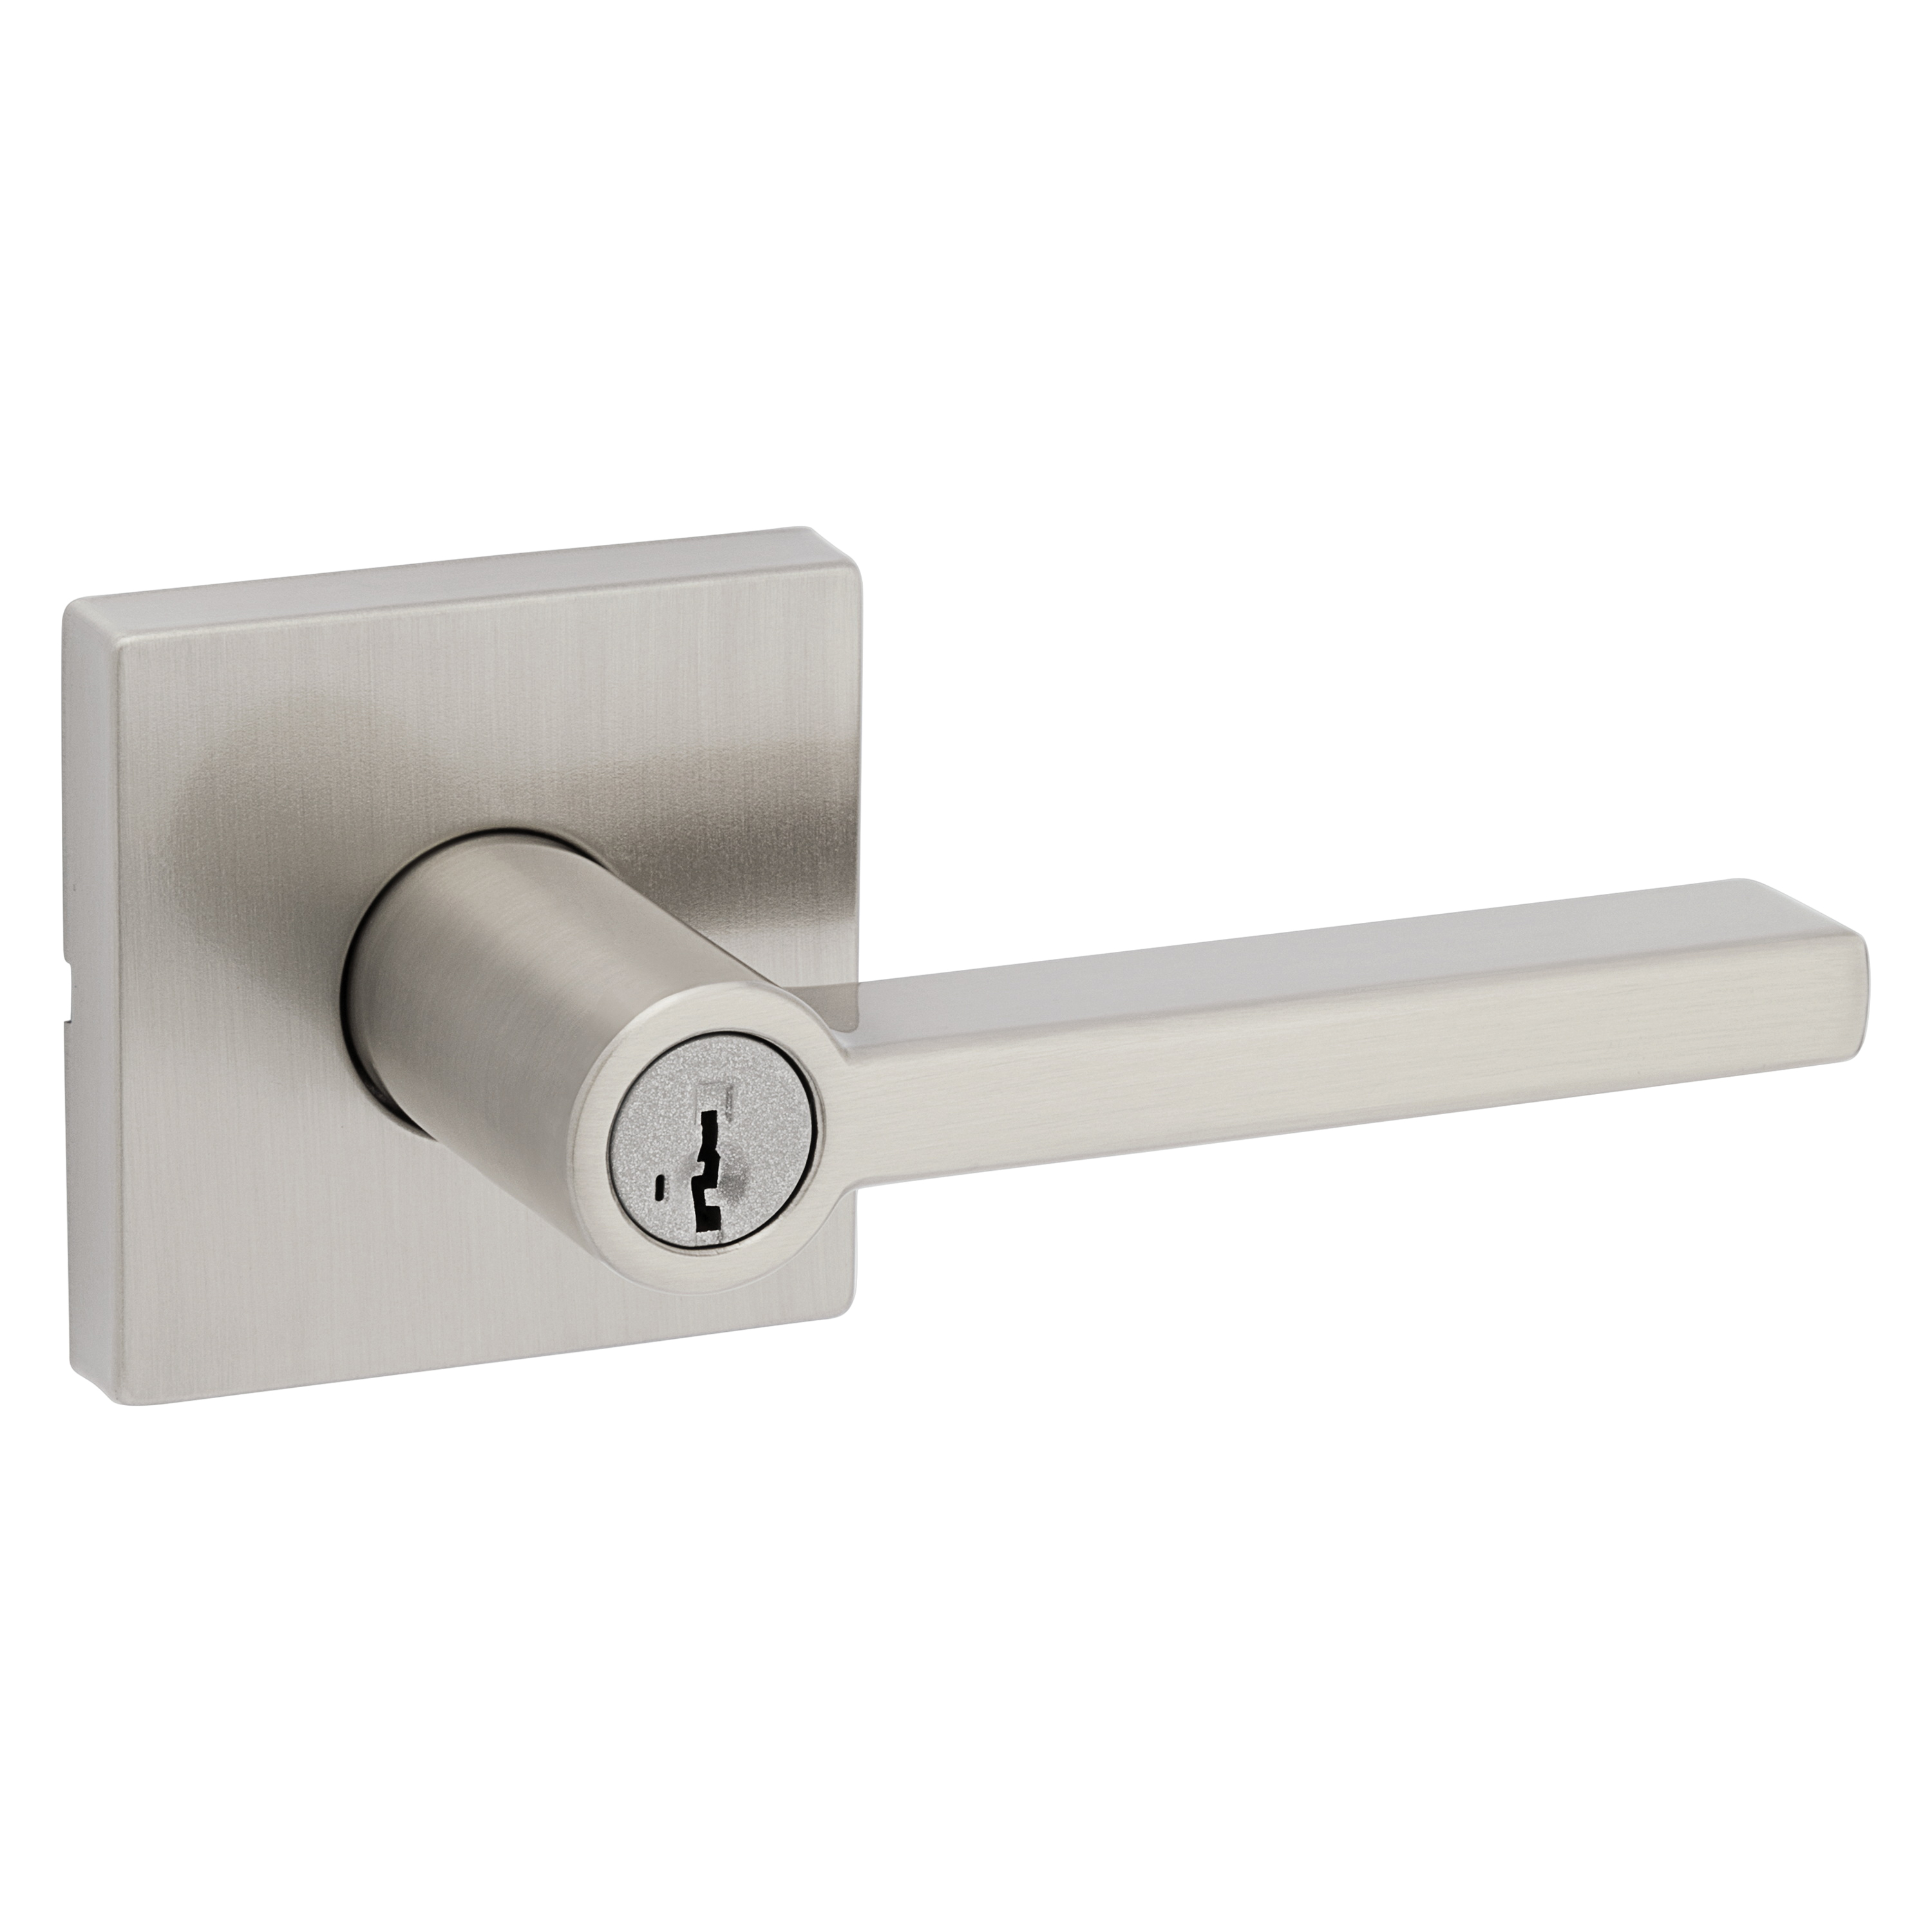 Kwikset Signature Series 156HFL SQT 15 Entry Lever, Pushbutton Lock, Satin Nickel, Metal, Residential, Reversible Hand